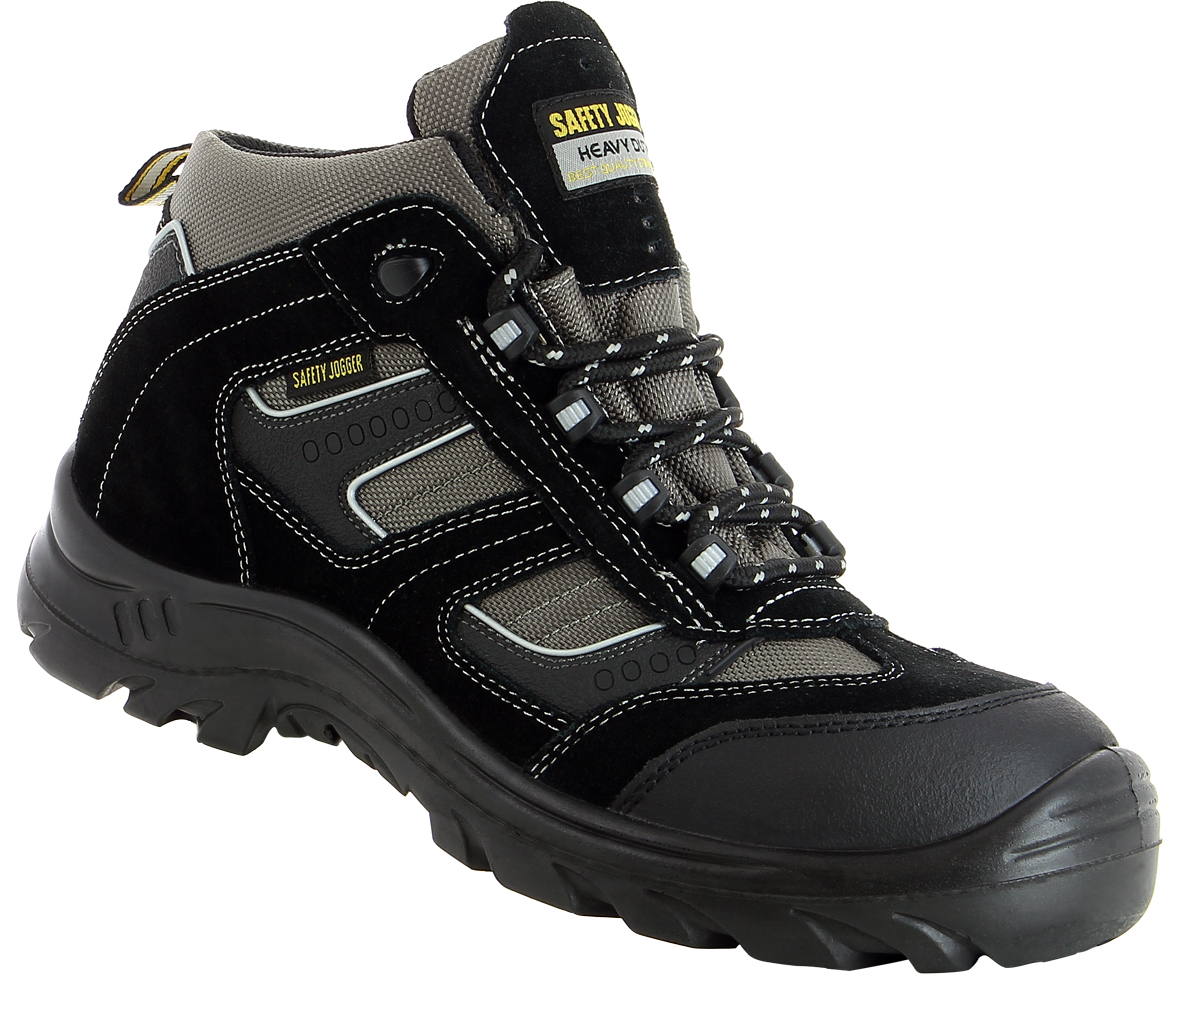 lady terrain safety shoes